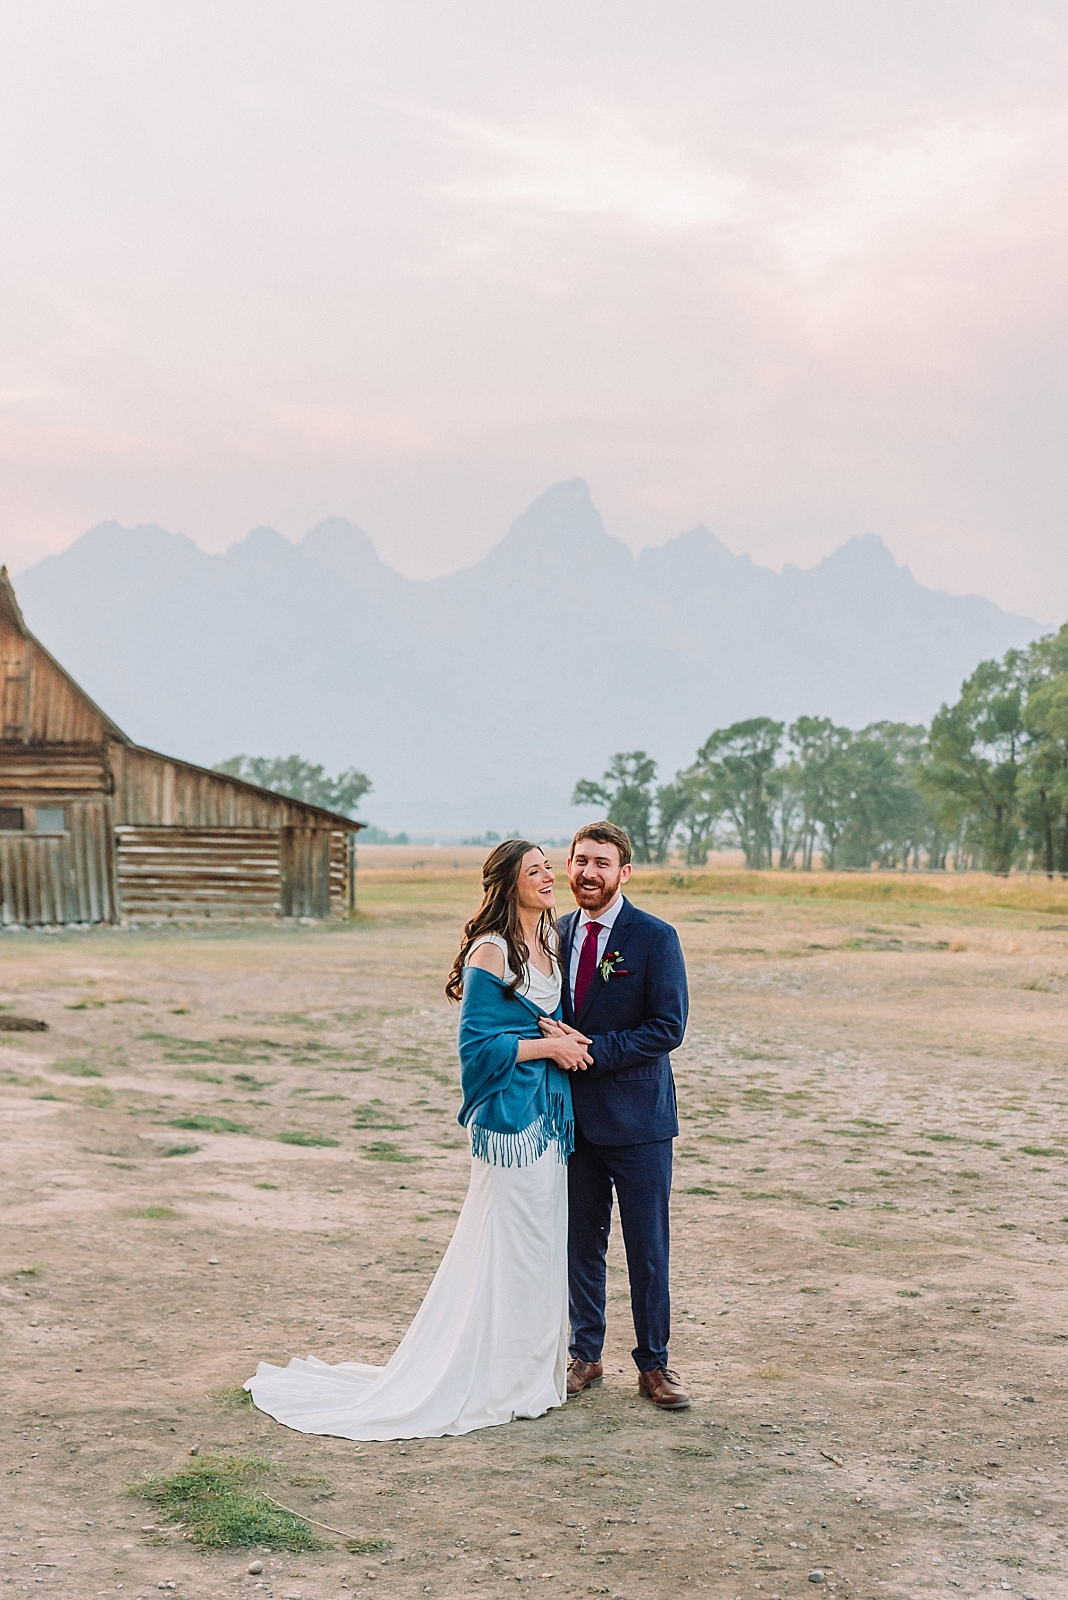 teton elopement packages, jackson hole wedding photography, how to elope in the tetons